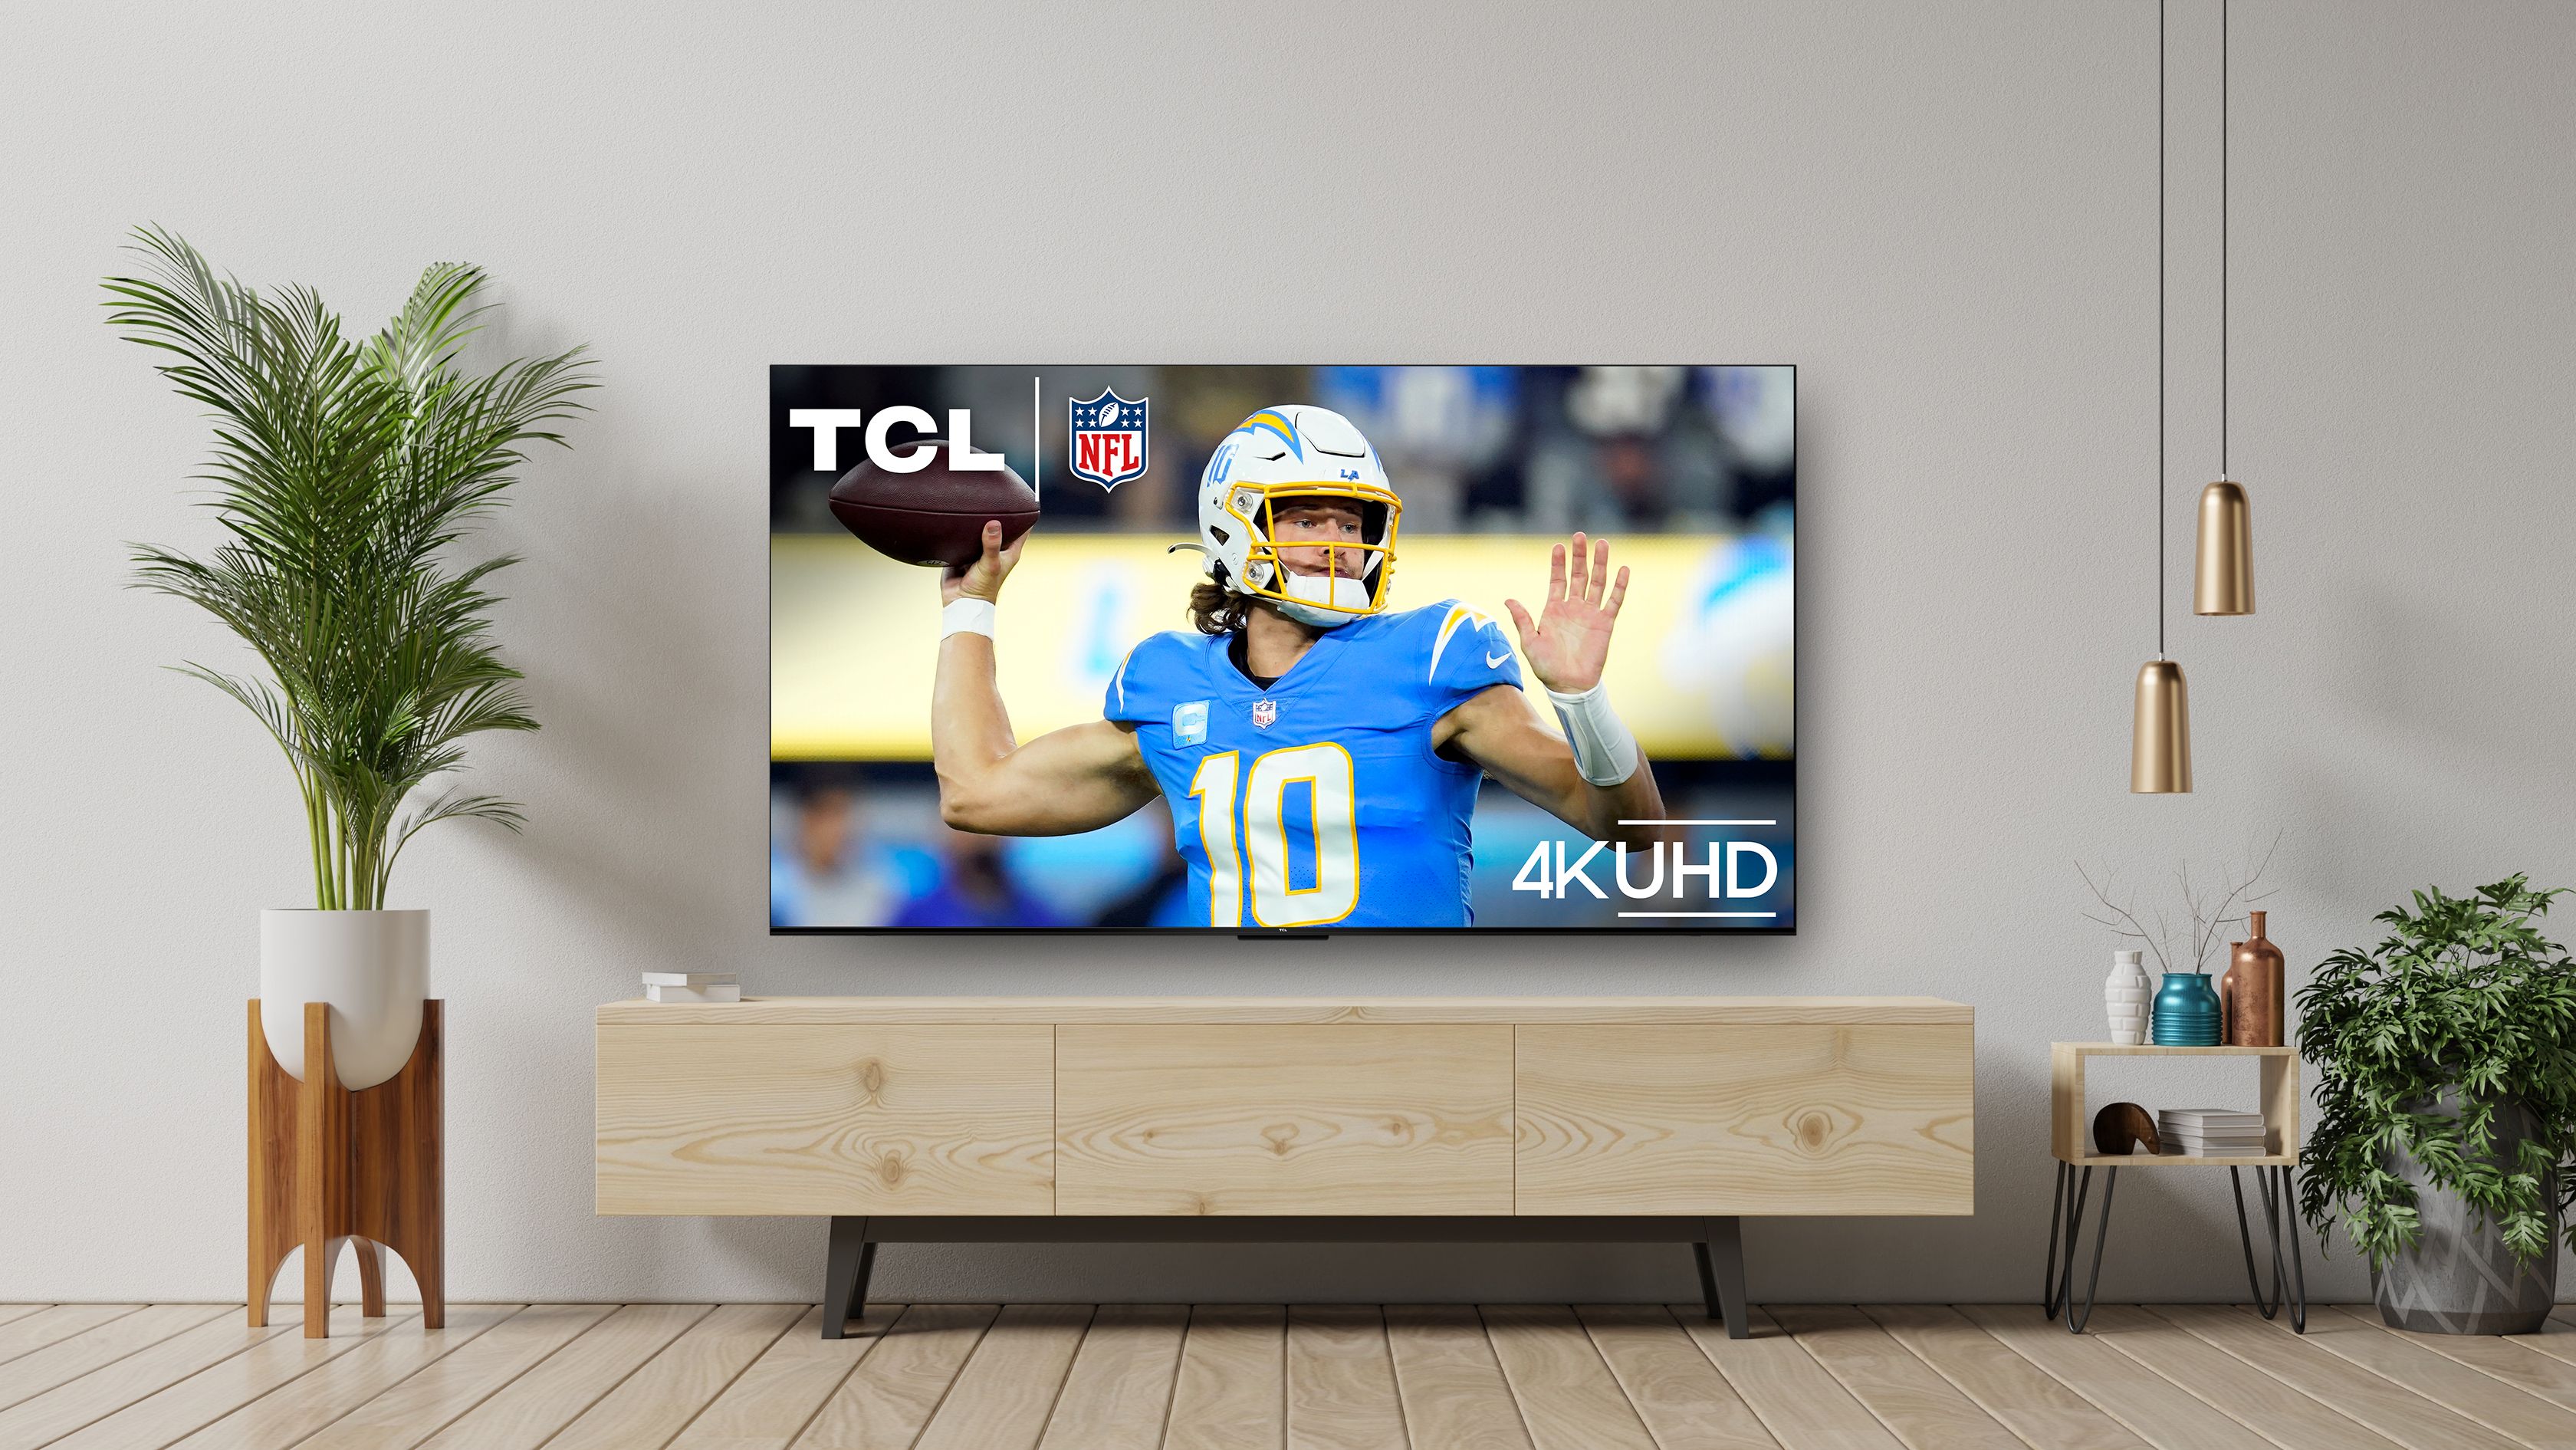 TCL 4 series Smart TV lifestyle featured